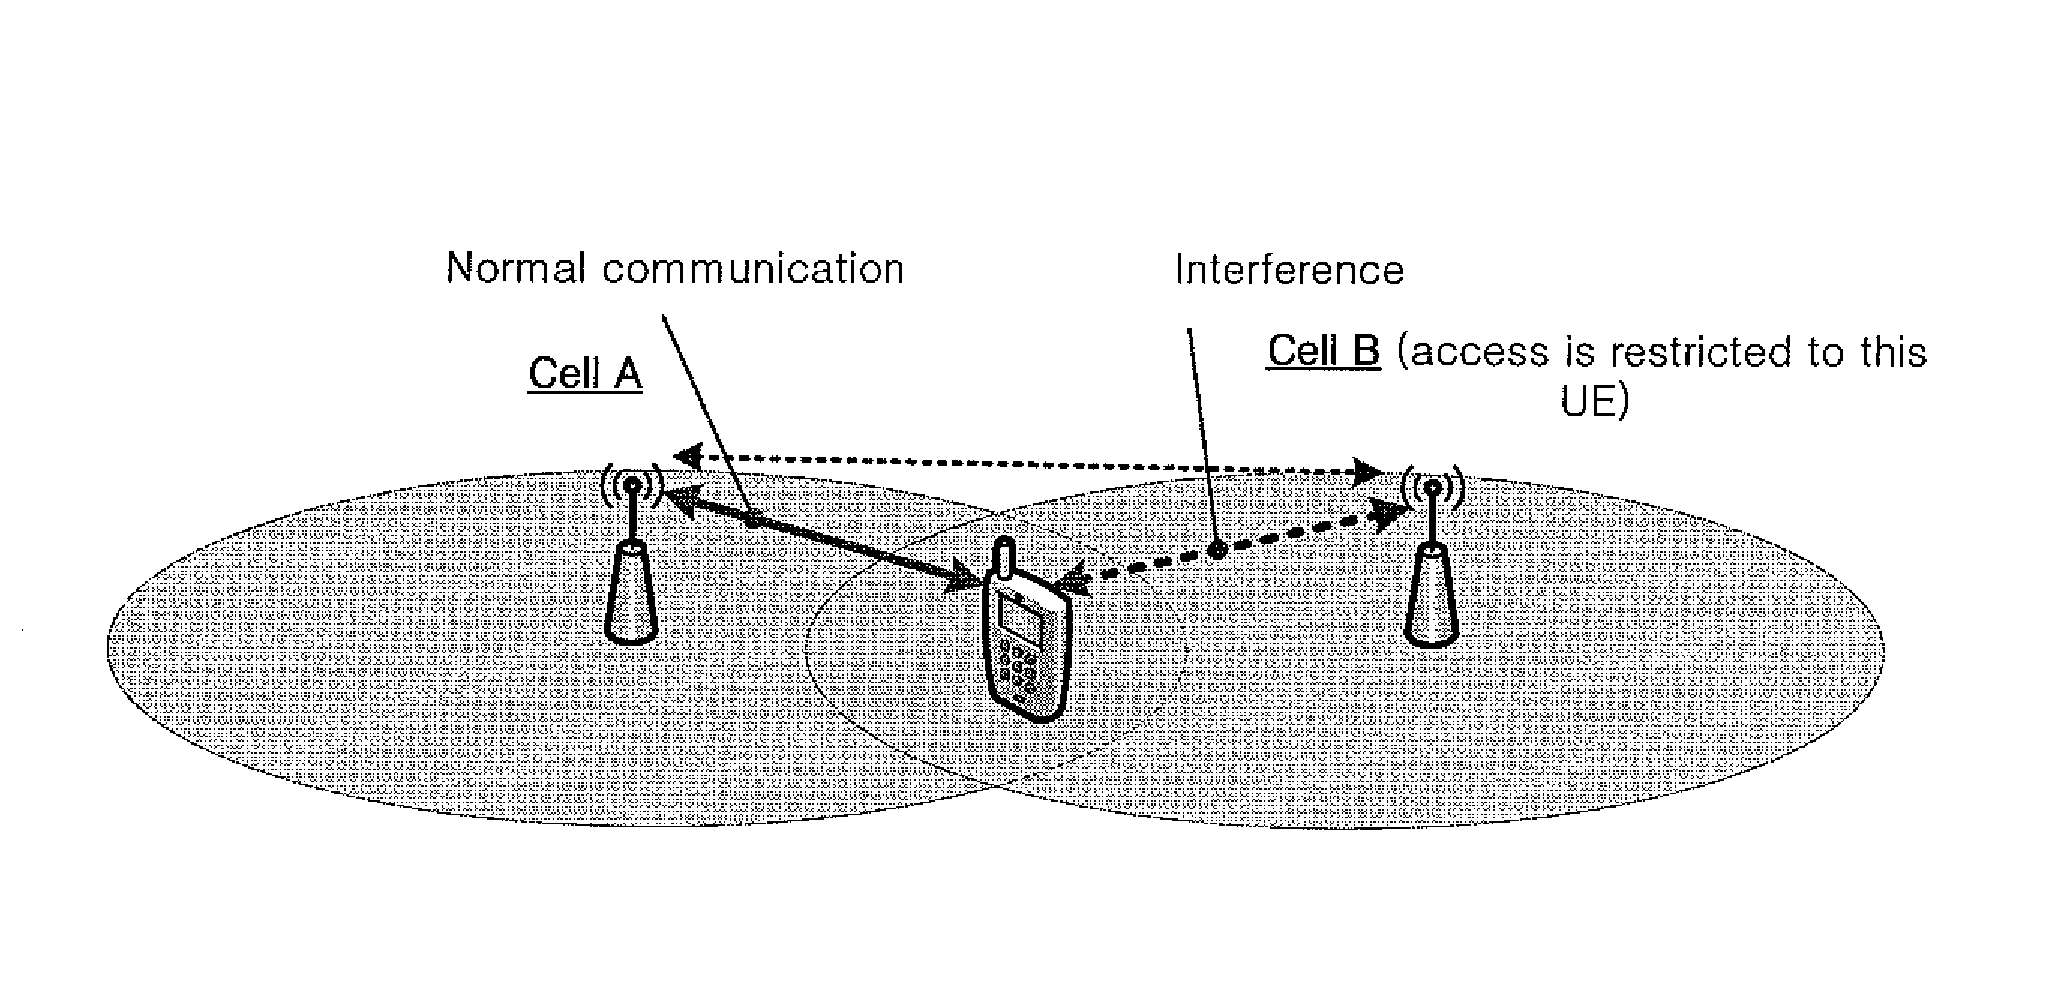 Method of releasing an access restriction at high interference cell in a wireless communication system